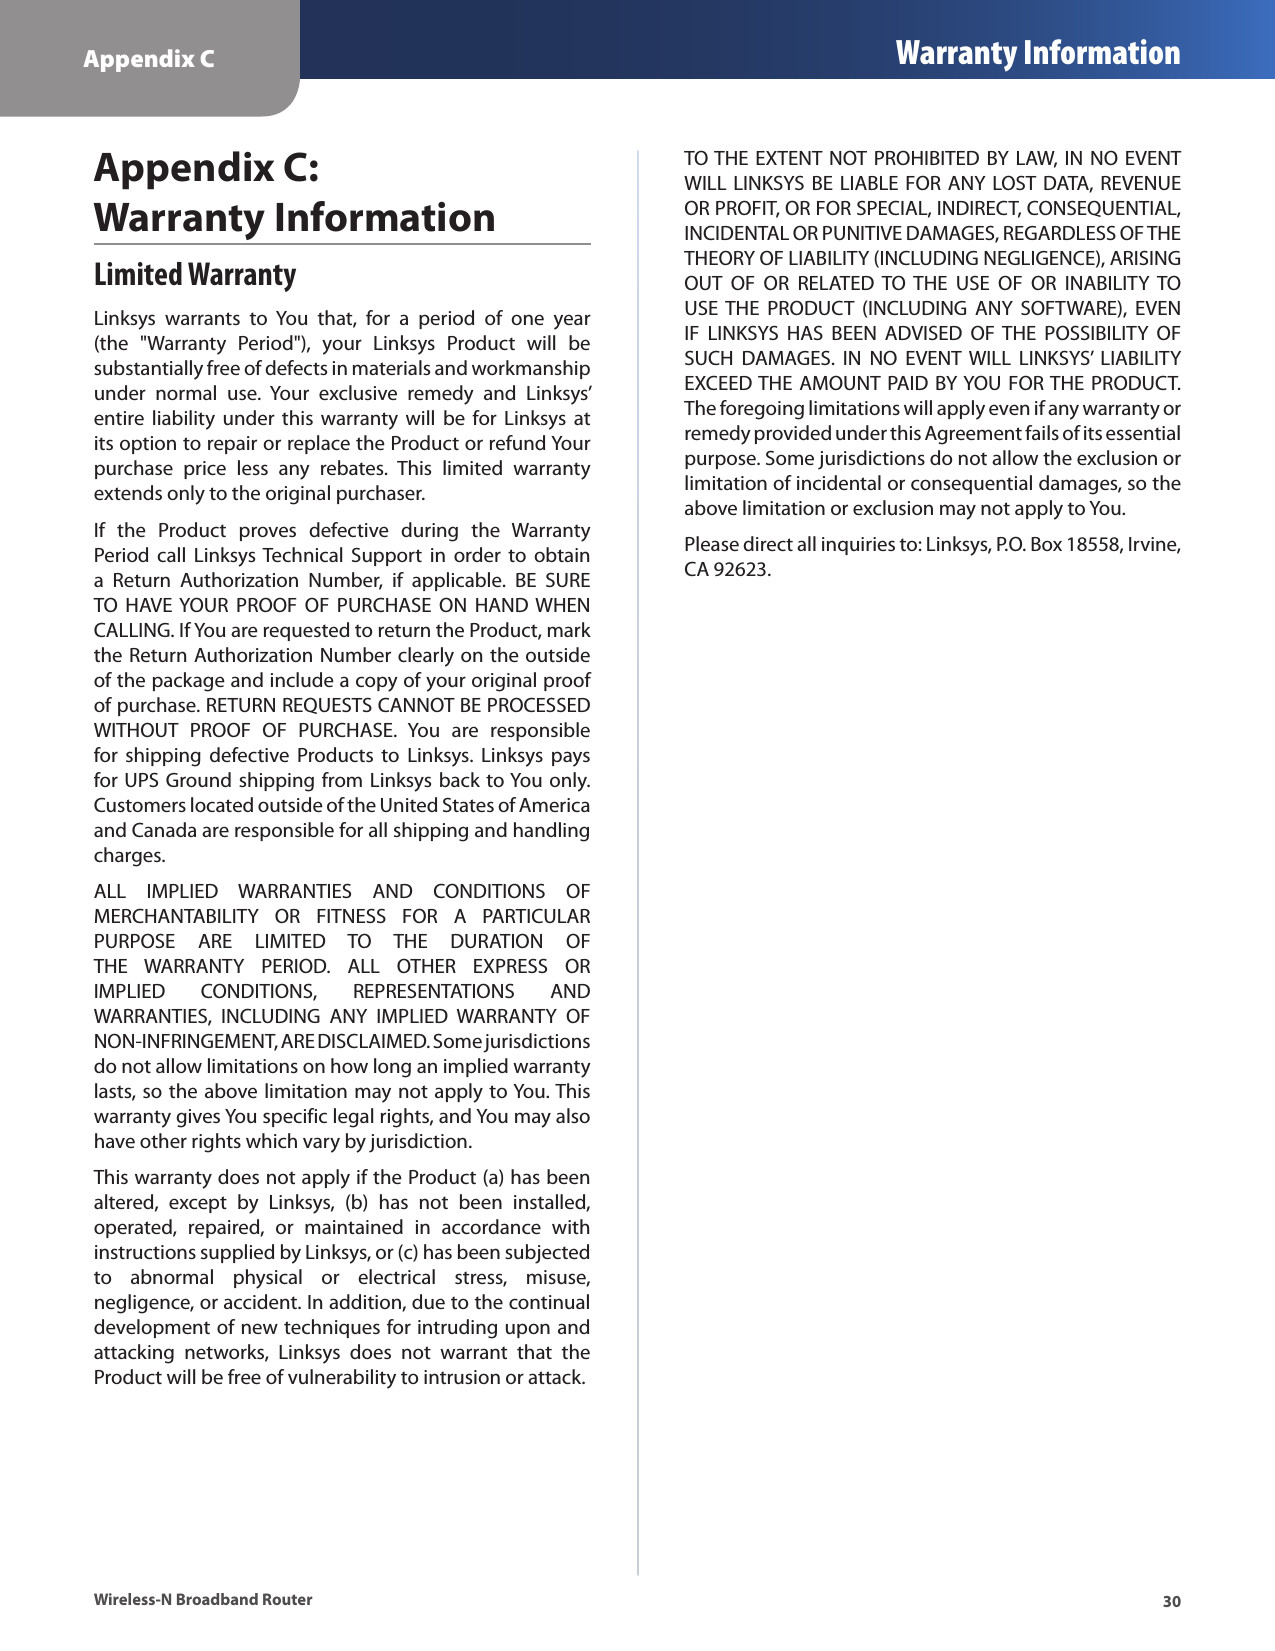 Appendix C Warranty Information30Wireless-N Broadband RouterLimited WarrantyLinksys  warrants  to  You  that,  for  a  period  of  one  year (the  &quot;Warranty  Period&quot;),  your  Linksys  Product  will  be substantially free of defects in materials and workmanship under  normal  use.  Your  exclusive  remedy  and  Linksys’ entire liability  under  this  warranty  will  be for Linksys  at its option to repair or replace the Product or refund Your purchase  price  less  any  rebates.  This  limited  warranty extends only to the original purchaser. If  the  Product  proves  defective  during  the  Warranty Period call  Linksys Technical  Support  in  order  to obtain a  Return  Authorization  Number,  if  applicable.  BE  SURE TO  HAVE YOUR  PROOF  OF  PURCHASE  ON  HAND WHEN CALLING. If You are requested to return the Product, mark the Return Authorization Number clearly on the outside of the package and include a copy of your original proof of purchase. RETURN REQUESTS CANNOT BE PROCESSED WITHOUT  PROOF  OF  PURCHASE.  You  are  responsible for  shipping  defective  Products  to  Linksys.  Linksys  pays for UPS Ground shipping from Linksys back to You only. Customers located outside of the United States of America and Canada are responsible for all shipping and handling charges. ALL  IMPLIED  WARRANTIES  AND  CONDITIONS  OF MERCHANTABILITY  OR  FITNESS  FOR  A  PARTICULAR PURPOSE  ARE  LIMITED  TO  THE  DURATION  OF THE  WARRANTY  PERIOD.  ALL  OTHER  EXPRESS  OR IMPLIED  CONDITIONS,  REPRESENTATIONS  AND WARRANTIES,  INCLUDING  ANY  IMPLIED  WARRANTY  OF NON-INFRINGEMENT, ARE DISCLAIMED. Some jurisdictions do not allow limitations on how long an implied warranty lasts, so the above limitation may not apply to You. This warranty gives You specific legal rights, and You may also have other rights which vary by jurisdiction.This warranty does not apply if the Product (a) has been altered,  except  by  Linksys,  (b)  has  not  been  installed, operated,  repaired,  or  maintained  in  accordance  with instructions supplied by Linksys, or (c) has been subjected to  abnormal  physical  or  electrical  stress,  misuse, negligence, or accident. In addition, due to the continual development of new techniques for intruding upon and attacking  networks,  Linksys  does  not  warrant  that  the Product will be free of vulnerability to intrusion or attack.TO THE  EXTENT NOT PROHIBITED BY LAW, IN NO  EVENT WILL LINKSYS BE LIABLE FOR ANY LOST DATA,  REVENUE OR PROFIT, OR FOR SPECIAL, INDIRECT, CONSEQUENTIAL, INCIDENTAL OR PUNITIVE DAMAGES, REGARDLESS OF THE THEORY OF LIABILITY (INCLUDING NEGLIGENCE), ARISING OUT  OF  OR  RELATED  TO THE  USE  OF  OR  INABILITY  TO USE THE  PRODUCT  (INCLUDING  ANY  SOFTWARE),  EVEN IF  LINKSYS  HAS  BEEN  ADVISED  OF THE  POSSIBILITY  OF SUCH  DAMAGES.  IN  NO  EVENT  WILL  LINKSYS’  LIABILITY EXCEED THE  AMOUNT PAID BY YOU FOR THE PRODUCT. The foregoing limitations will apply even if any warranty or remedy provided under this Agreement fails of its essential purpose. Some jurisdictions do not allow the exclusion or limitation of incidental or consequential damages, so the above limitation or exclusion may not apply to You.Please direct all inquiries to: Linksys, P.O. Box 18558, Irvine, CA 92623.Appendix C:  Warranty Information